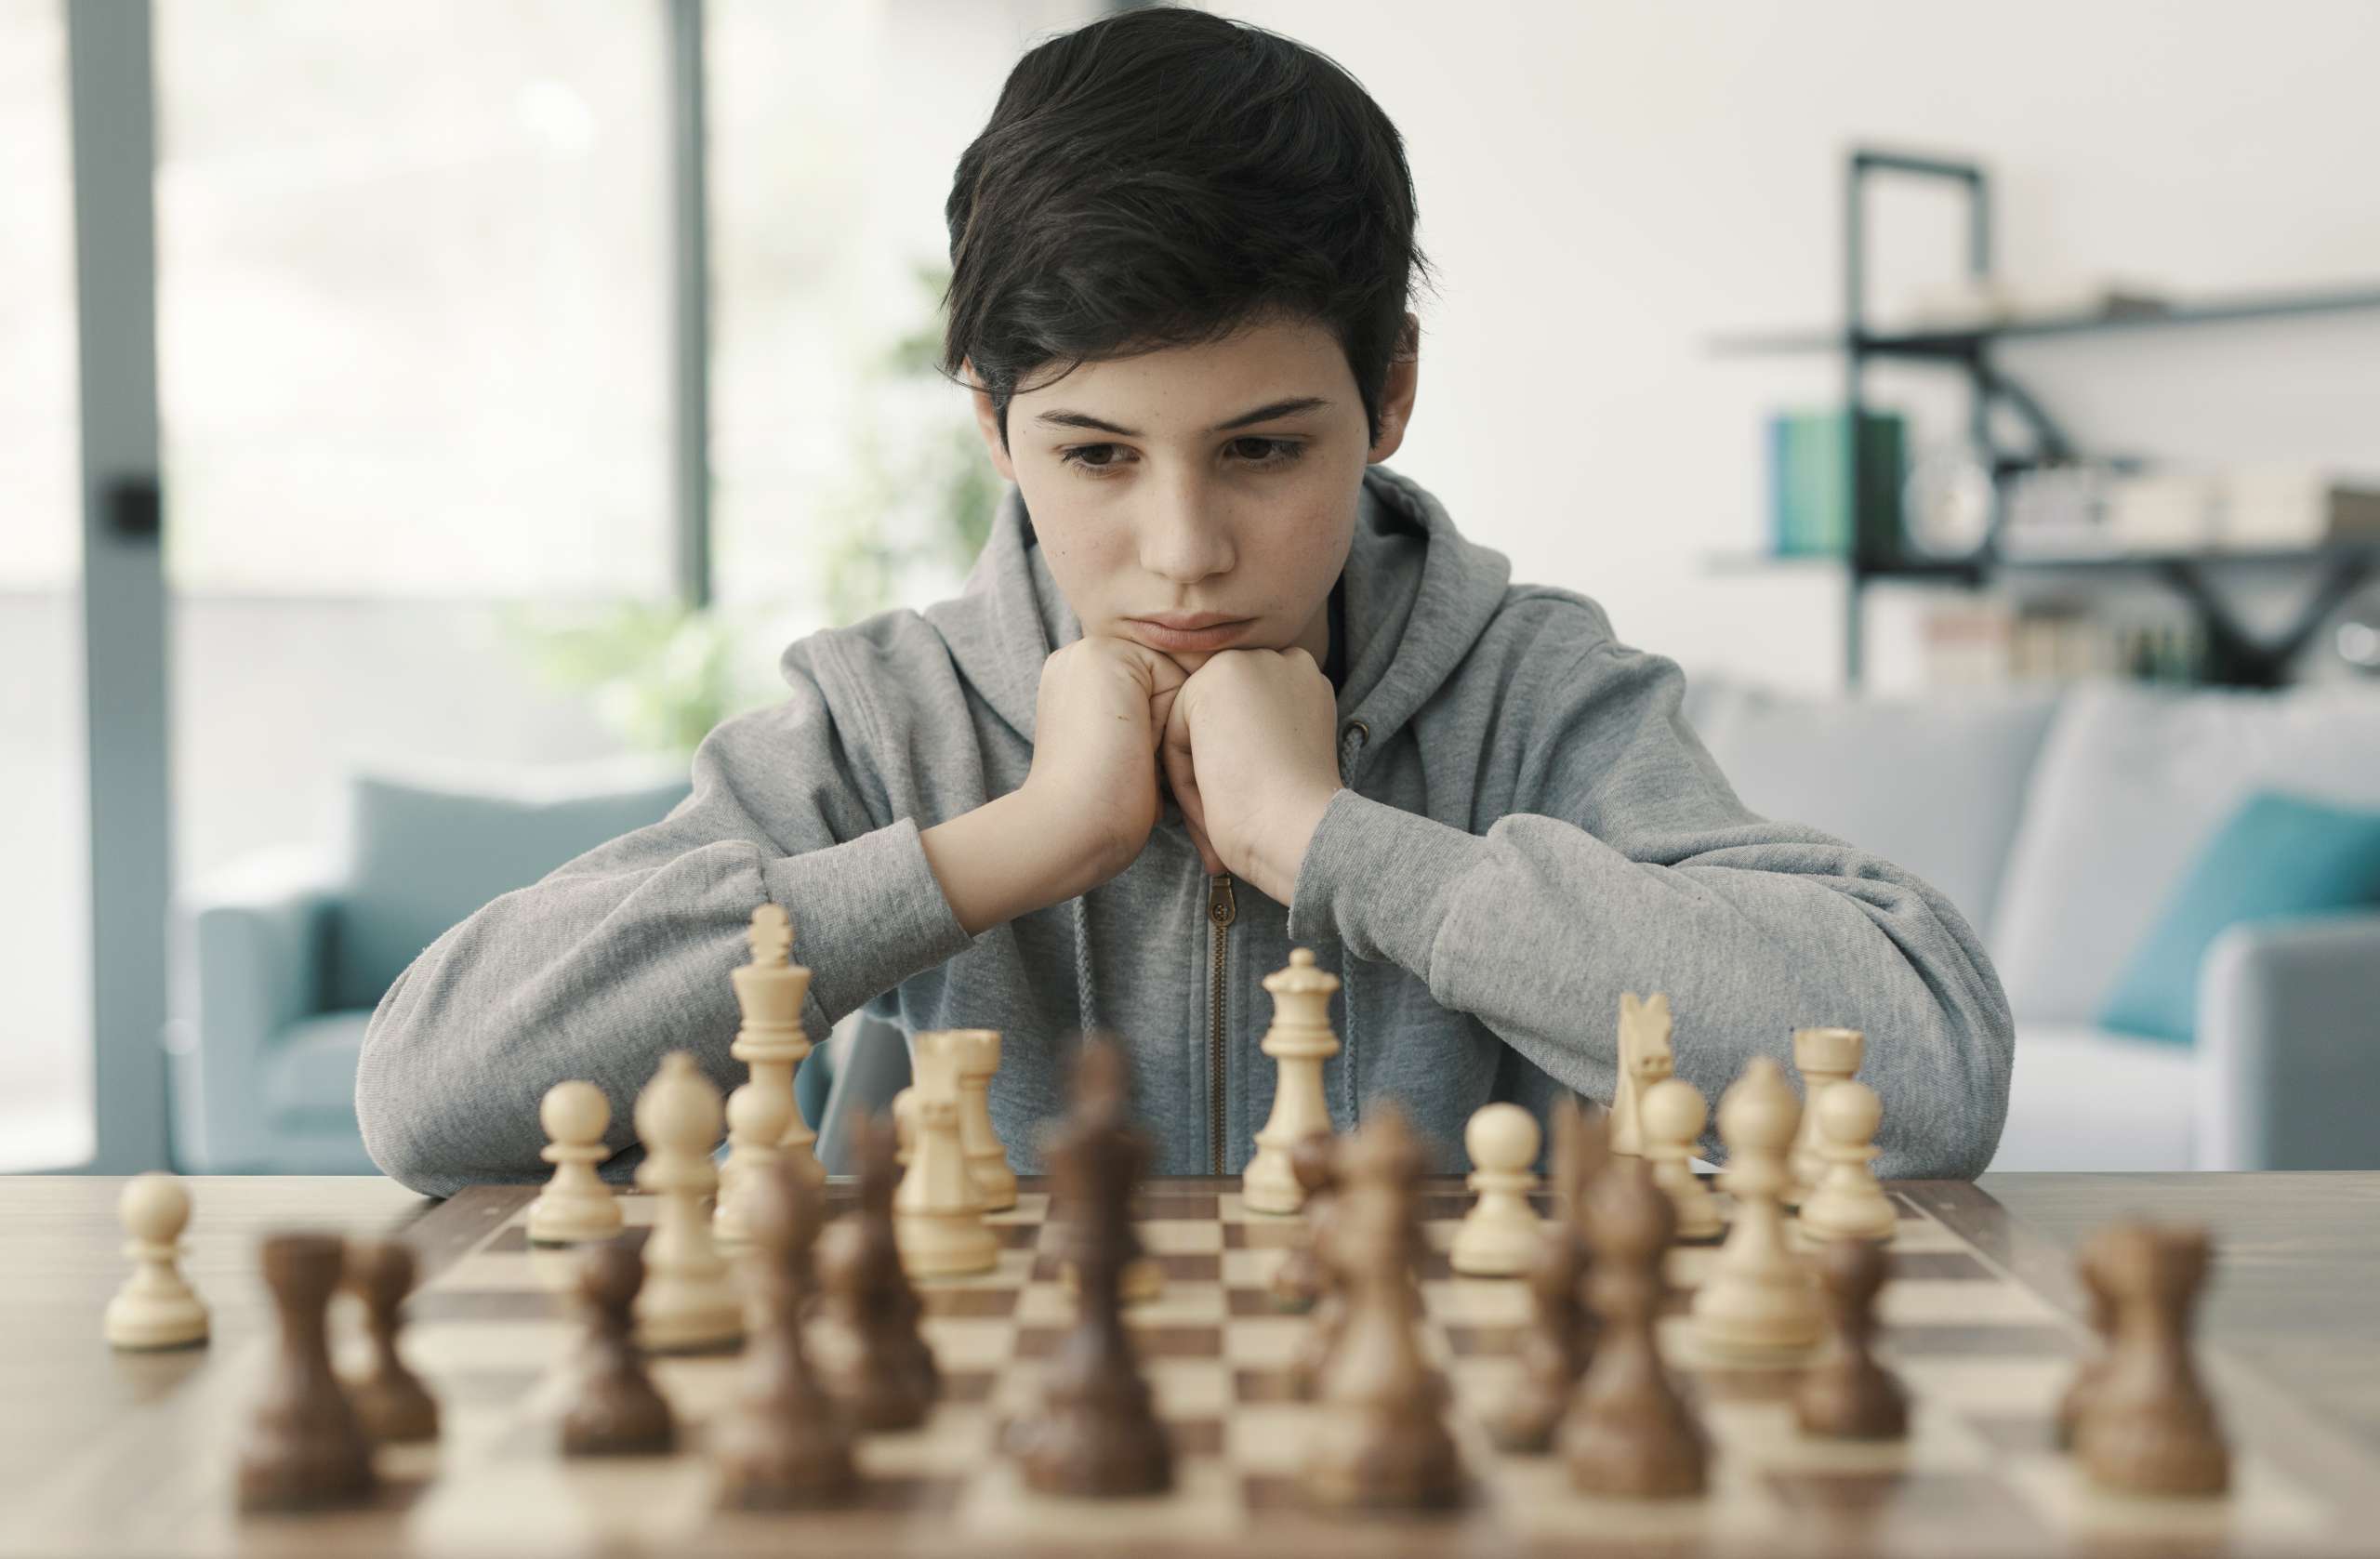 Intermediate Chess Classes: Advance Your Skills with ProChessmates